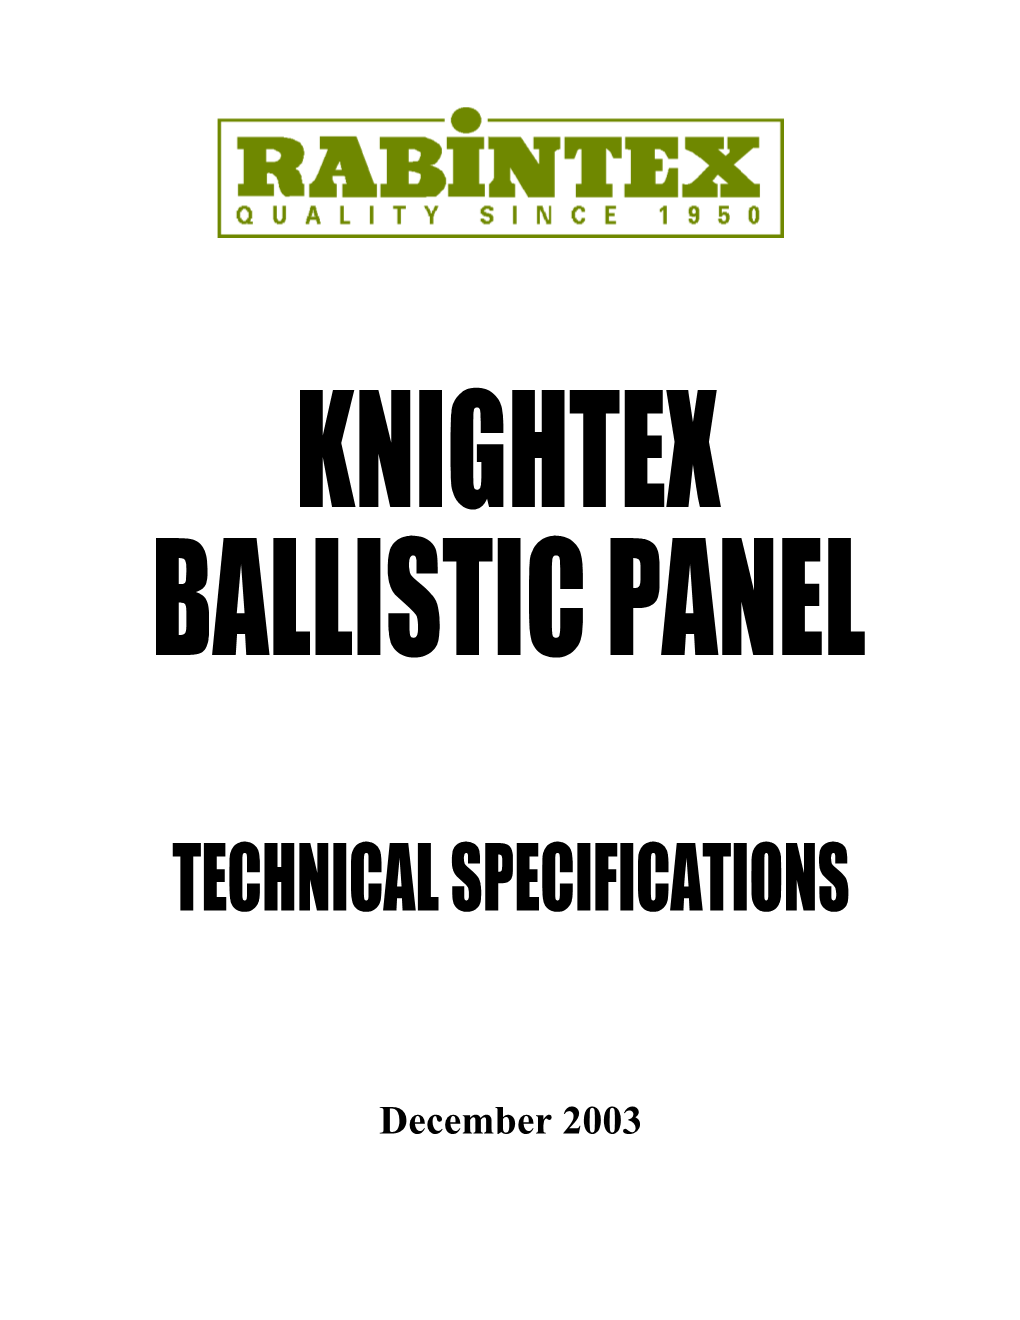 The Panel Is Offered for Use by Both Bullet-Proof Vest Manufacturers and End Users